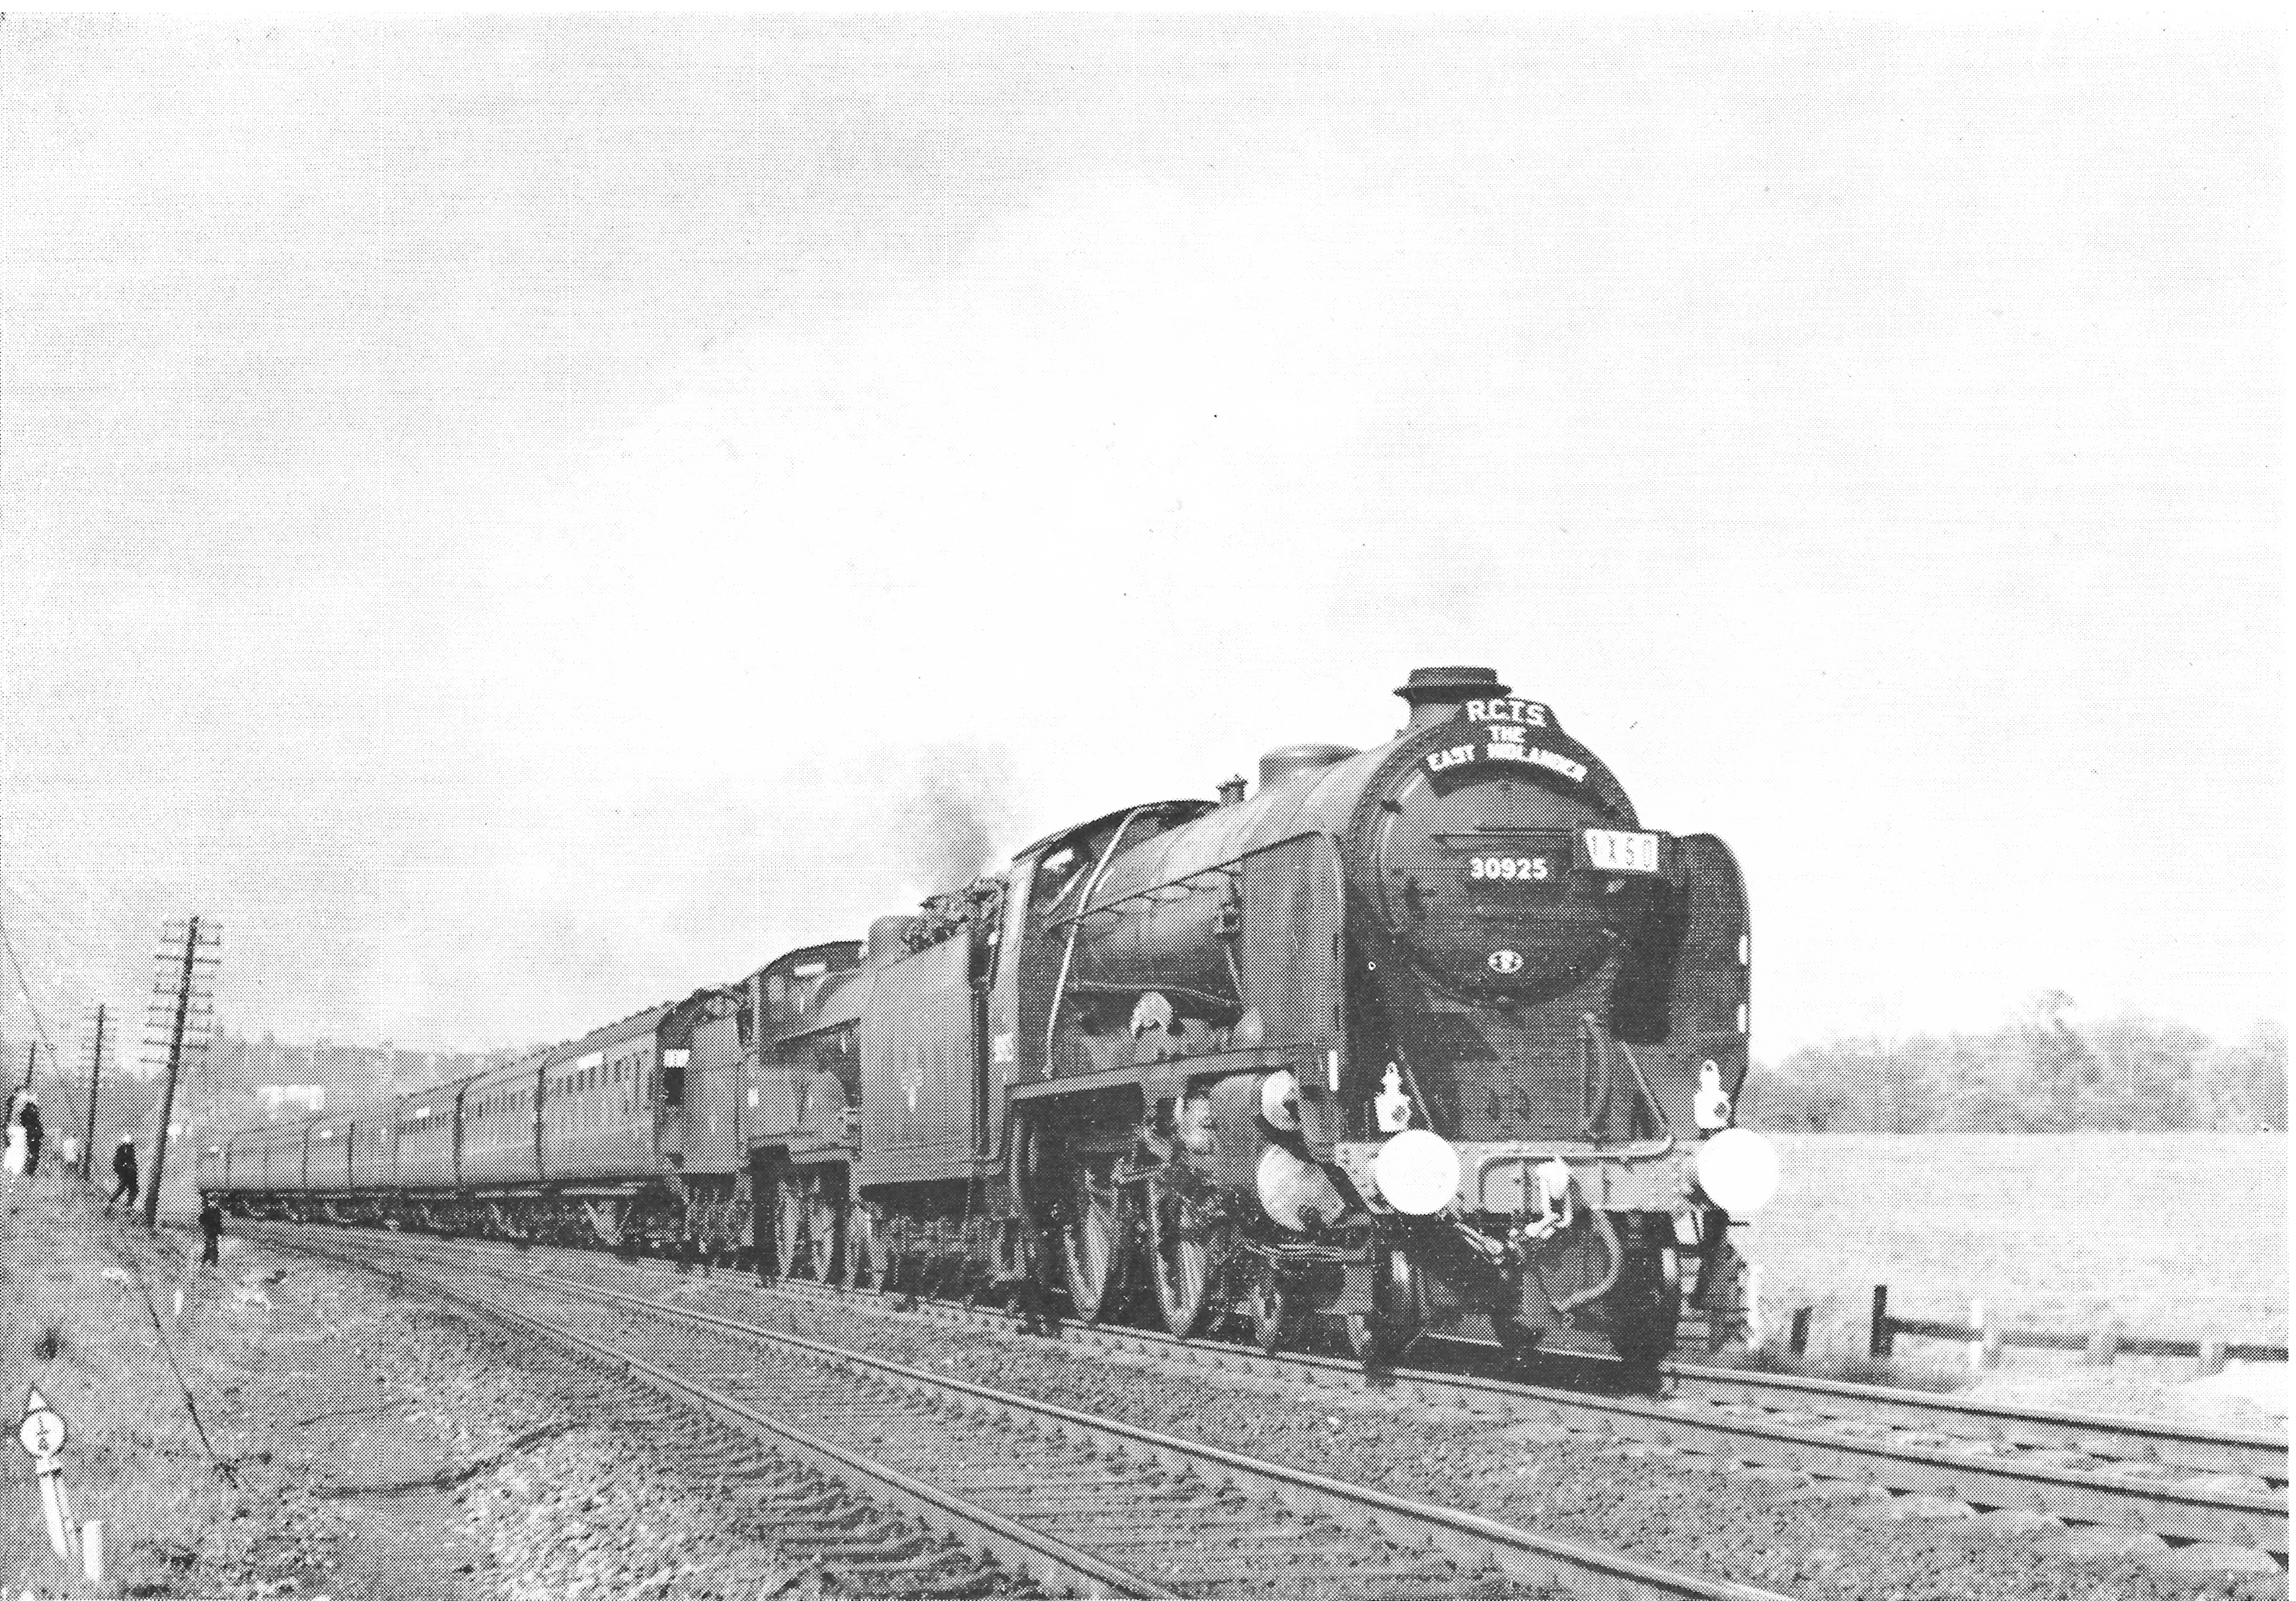 East Midlander No.5. 30925 and L.M.S. Class 2P 4-4-0 No. 40646 approaching the Tees viaduct at Croft, 13th May 1962. R. Leslie
Scanned from July 1962 RO. The report in RO ended “In the L.M.R. Stock Alterations list issued on 18th May, it was discovered that 40646 was officially withdrawn w/e 12/5/62. It is certainly unusual for a withdrawn locomotive to immediately run a 300-mile tour, some of it at speeds in excess of 80 m.p.h. !” The editors added “We understand that 40646 was withdrawn on the official life expiration of its boiler, and that it was given a special “stay of execution” to work this train. Its performance clearly pointed to an otherwise excellent mechanical condition.”